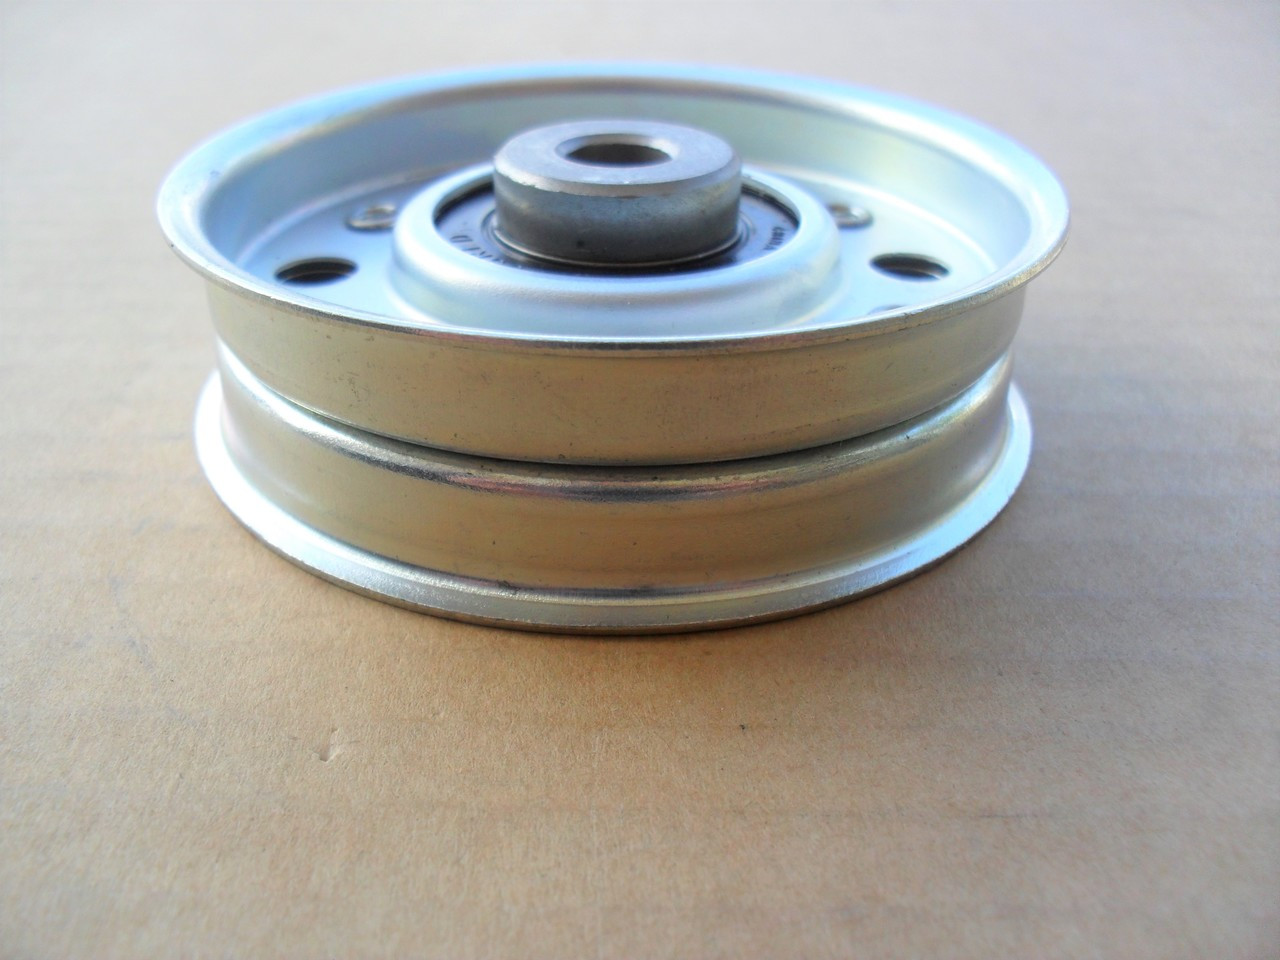 Flat Idler Pulley for AYP, Craftsman 61620, Height: 7/8" ID: 3/8" OD: 3-1/4"